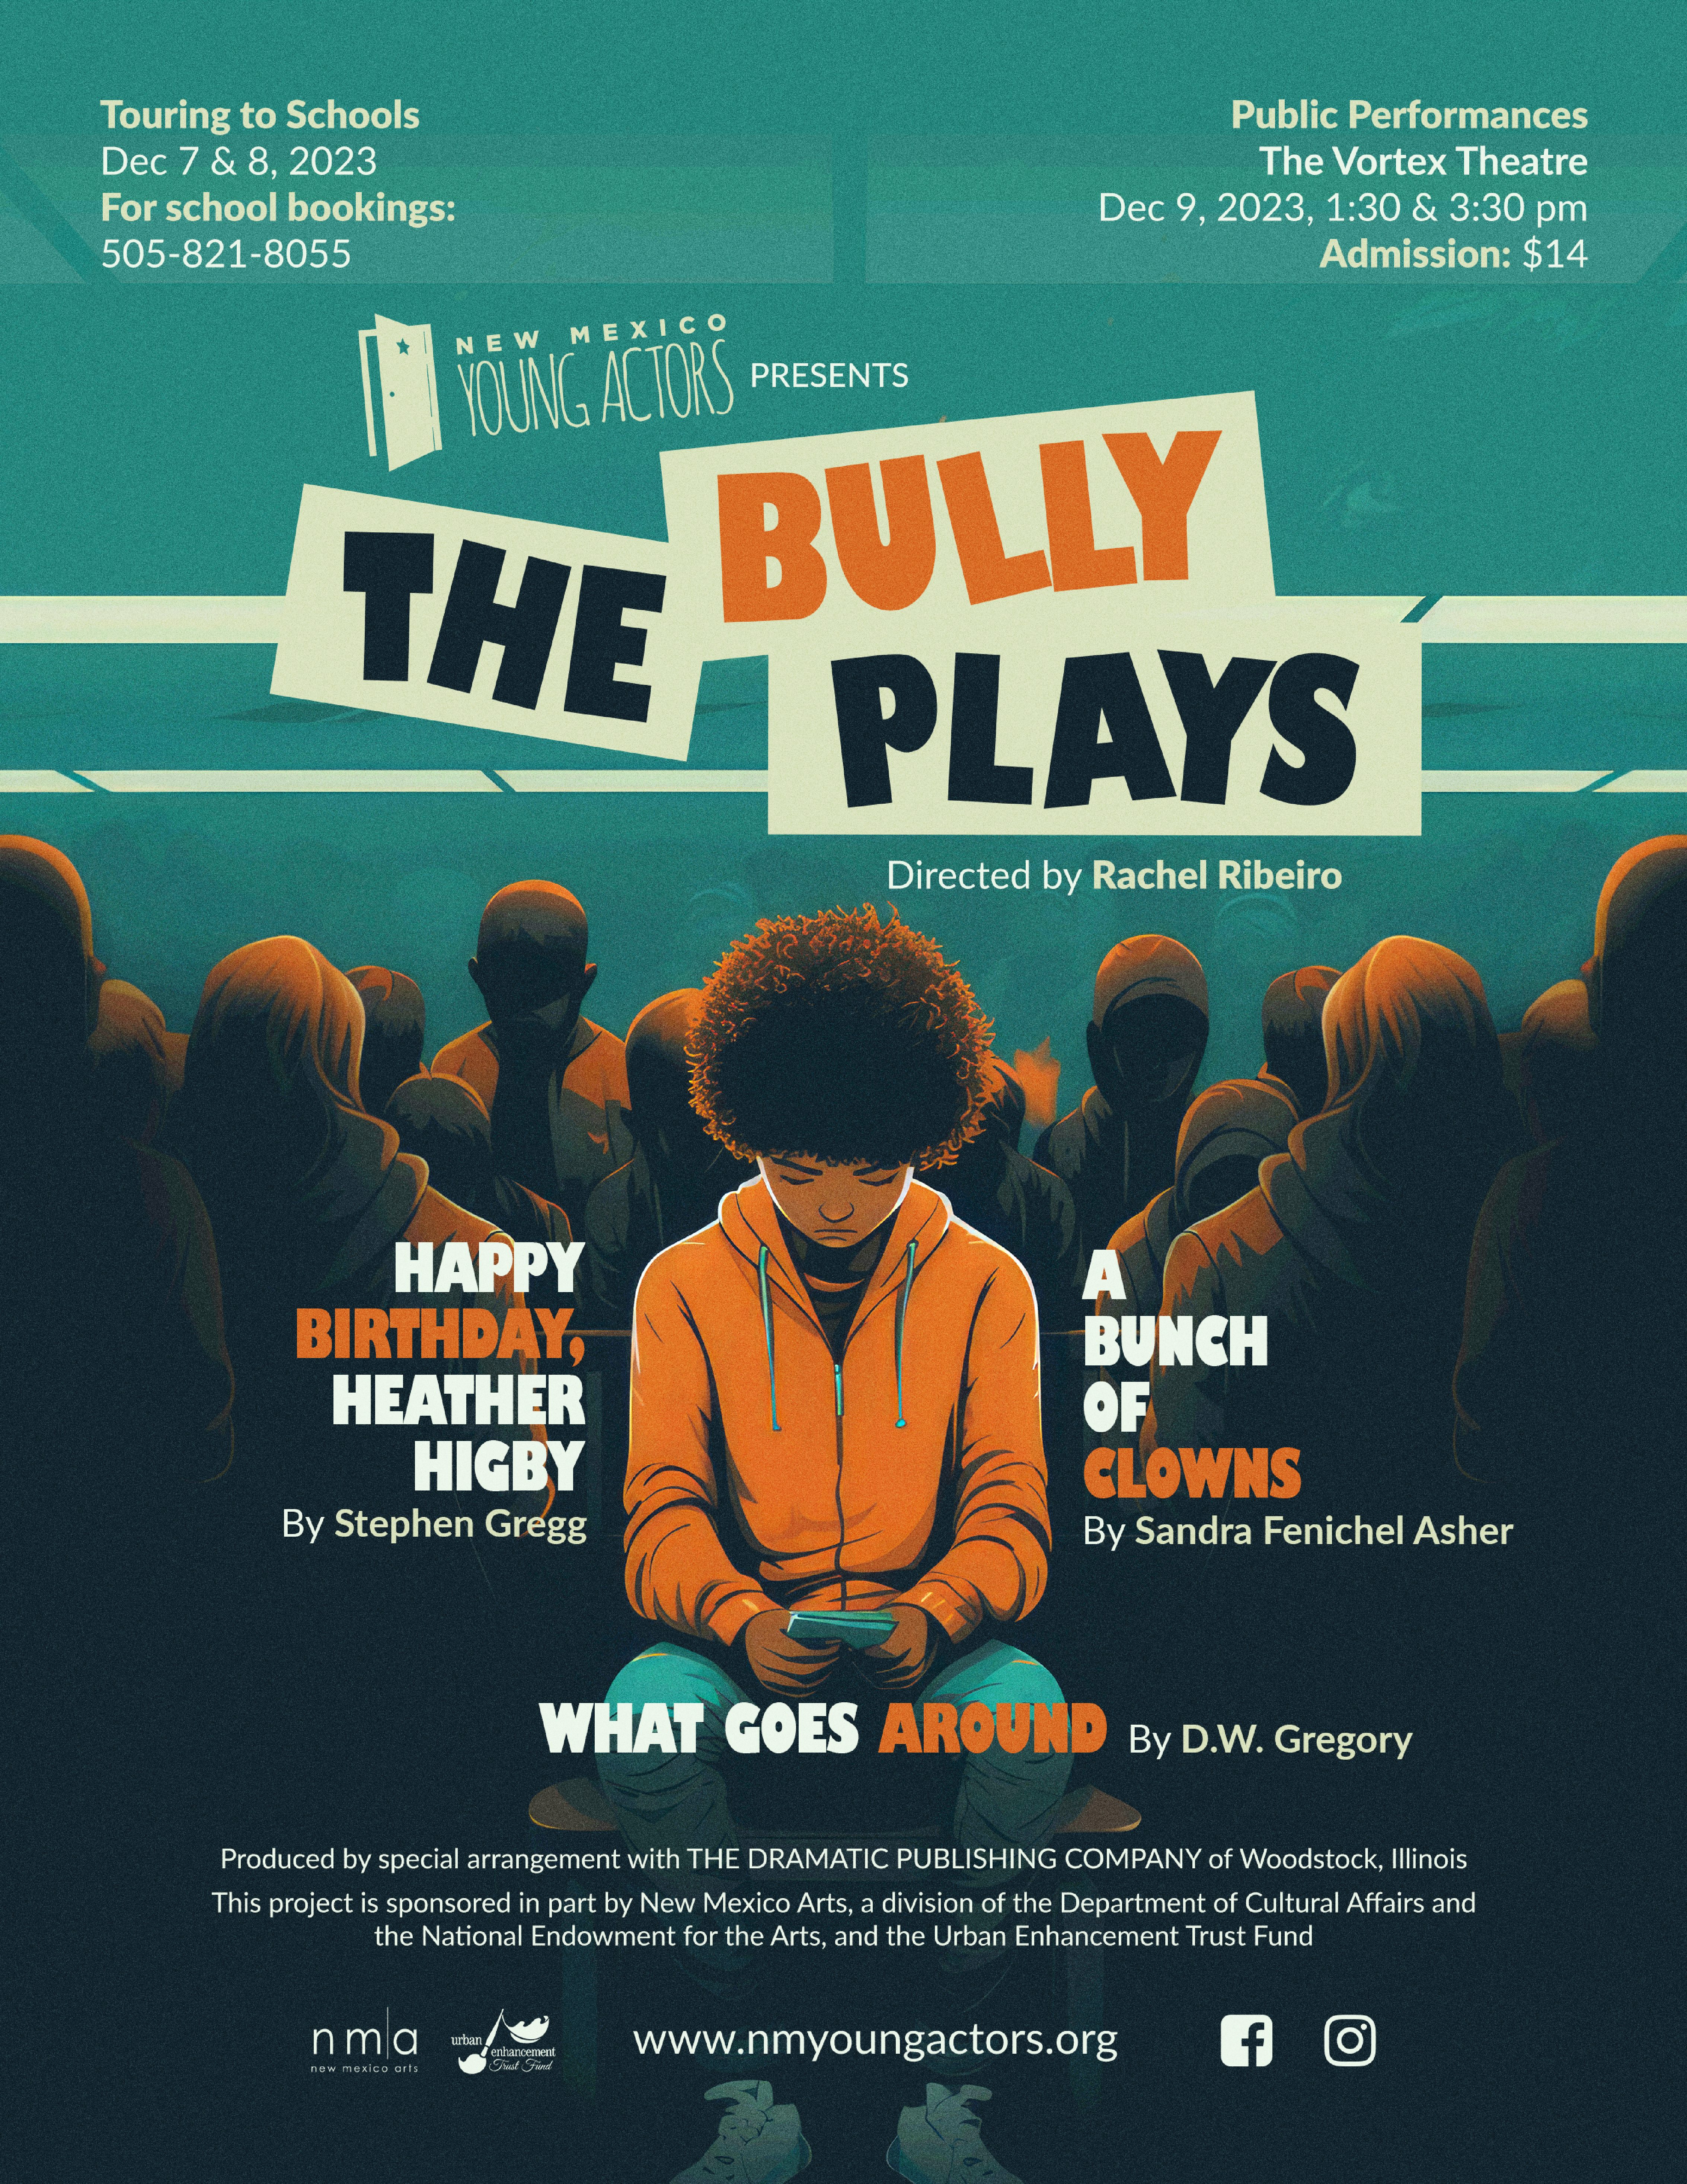 The Bully Plays – NM Young Actors